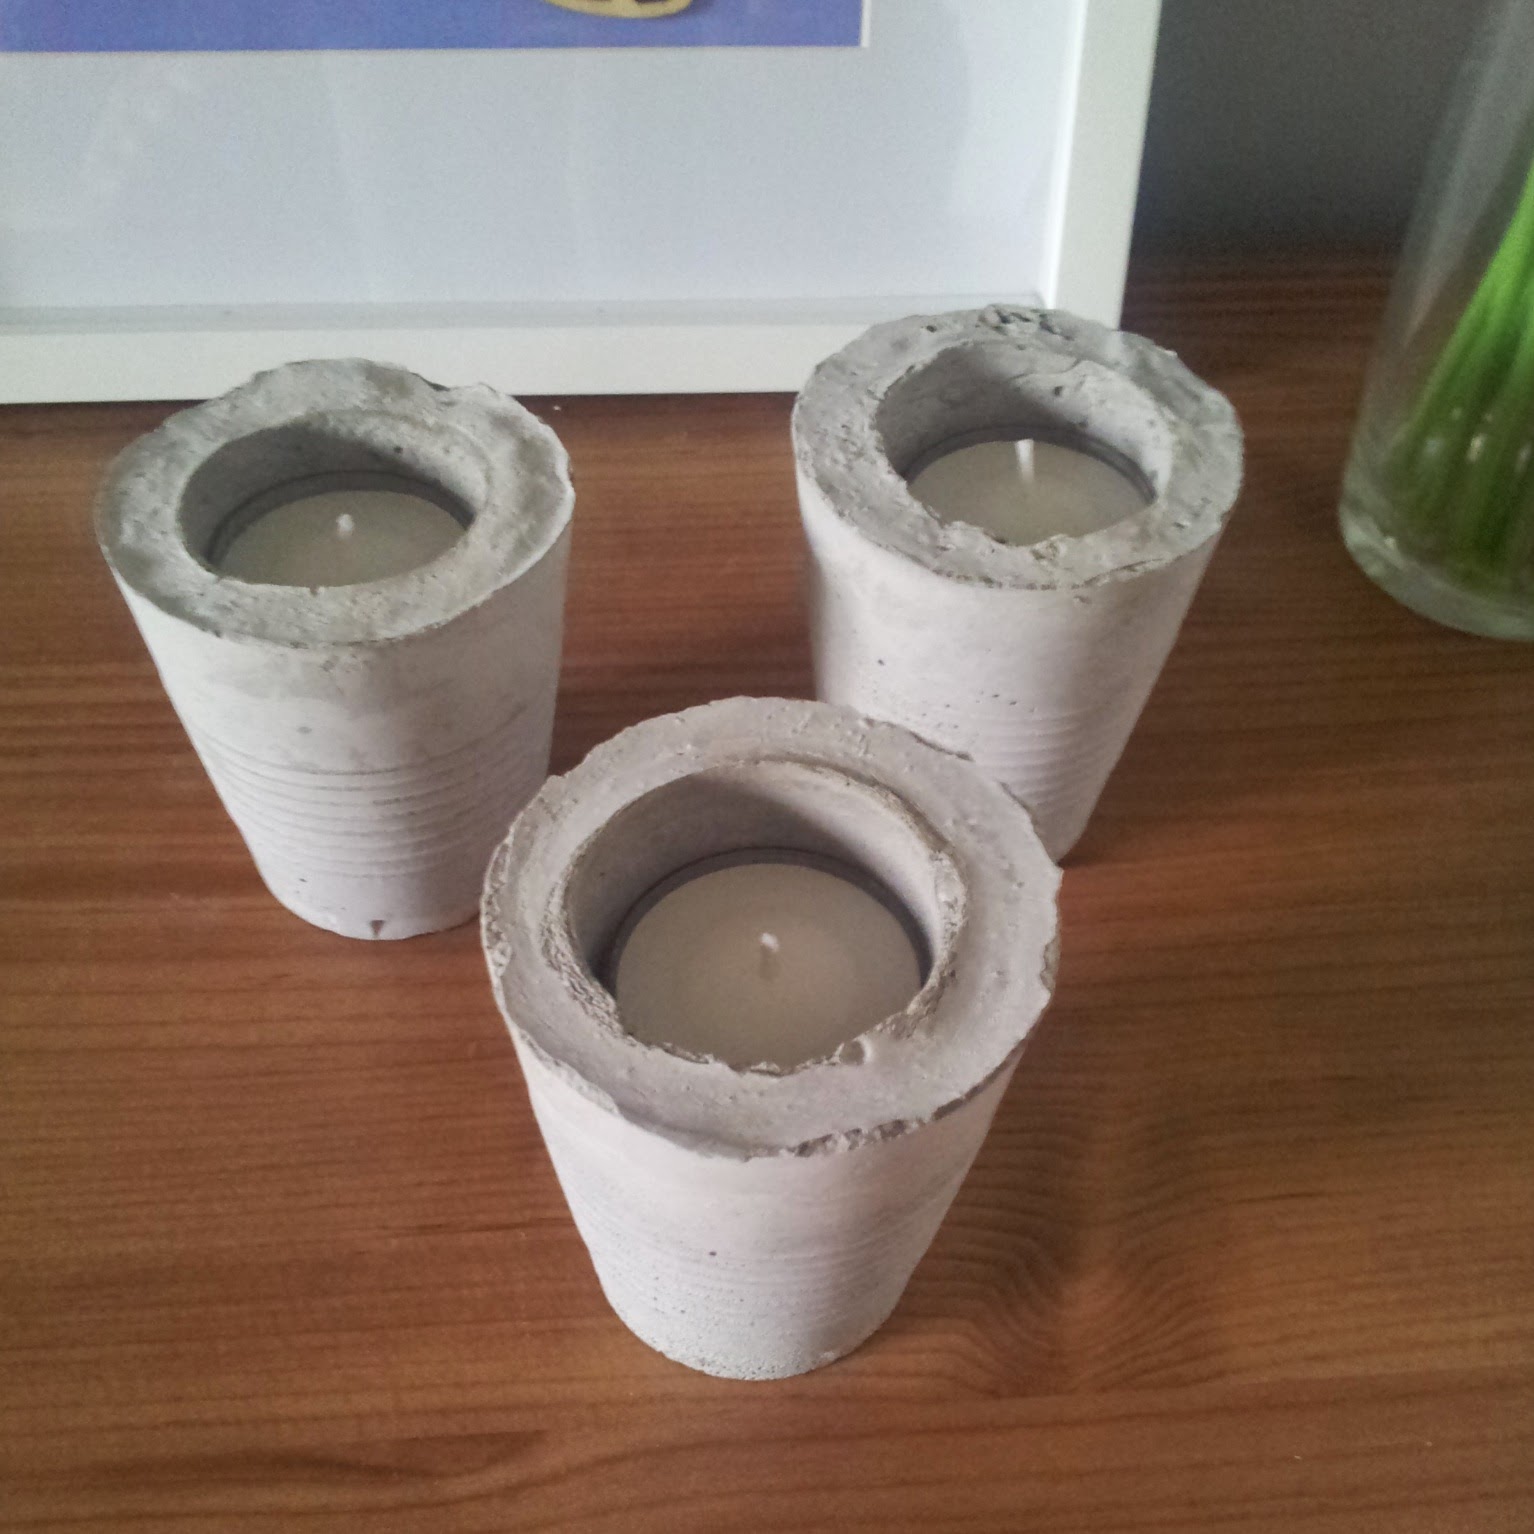 https://www.etsy.com/au/listing/193198099/set-of-3-cement-tealight-holders?ref=shop_home_active_13